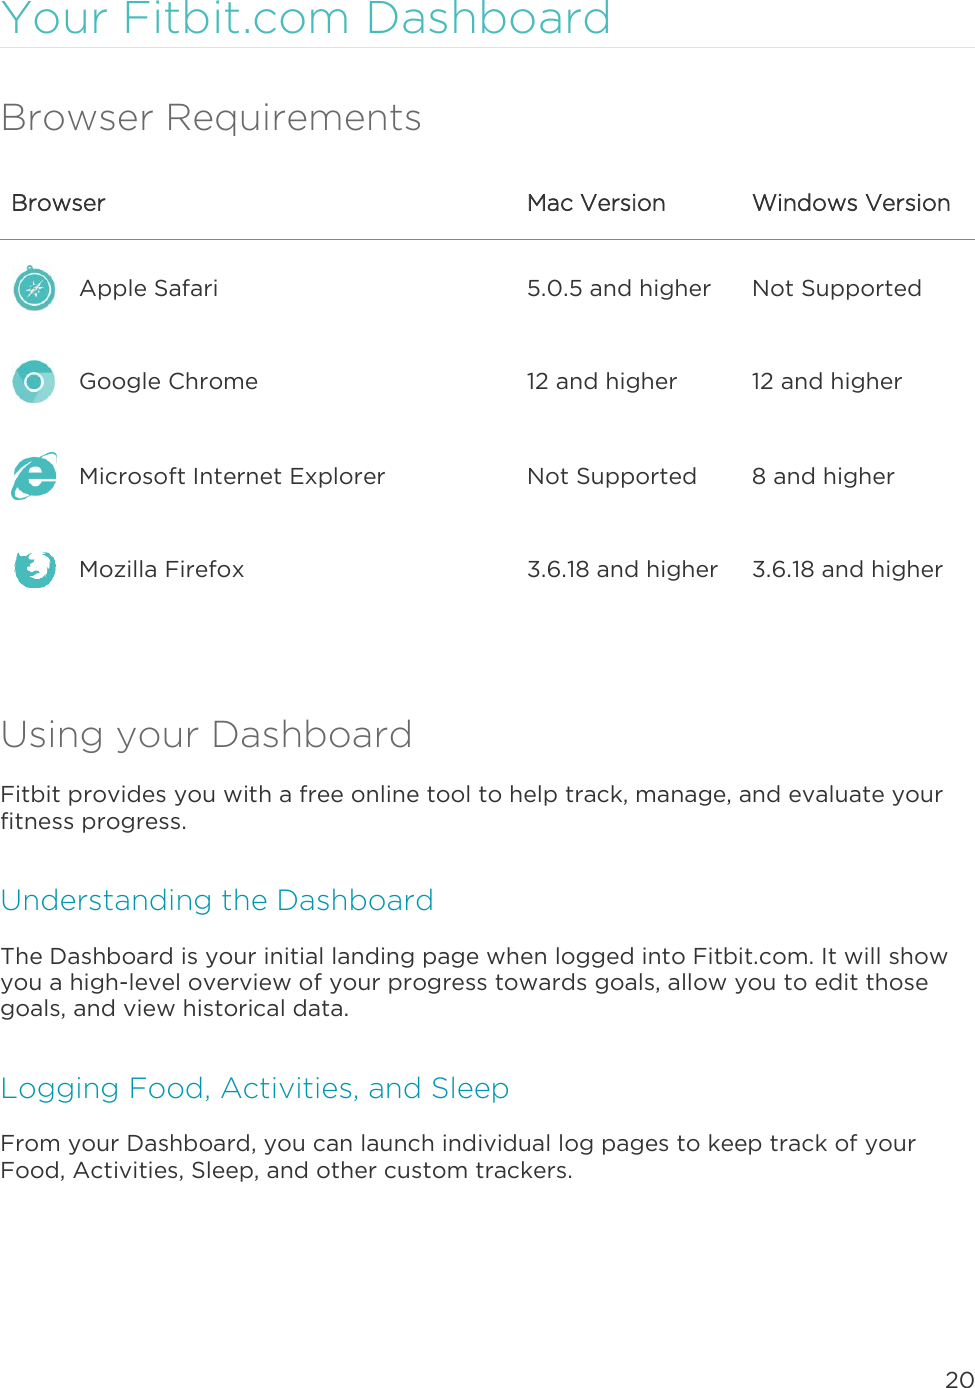 20  Your Fitbit.com Dashboard Browser Requirements Browser   Mac Version Windows Version  Apple Safari 5.0.5 and higher Not Supported  Google Chrome 12 and higher 12 and higher  Microsoft Internet Explorer Not Supported 8 and higher  Mozilla Firefox 3.6.18 and higher 3.6.18 and higher  Using your Dashboard Fitbit provides you with a free online tool to help track, manage, and evaluate your fitness progress. Understanding the Dashboard The Dashboard is your initial landing page when logged into Fitbit.com. It will show you a high-level overview of your progress towards goals, allow you to edit those goals, and view historical data.  Logging Food, Activities, and Sleep From your Dashboard, you can launch individual log pages to keep track of your Food, Activities, Sleep, and other custom trackers.  